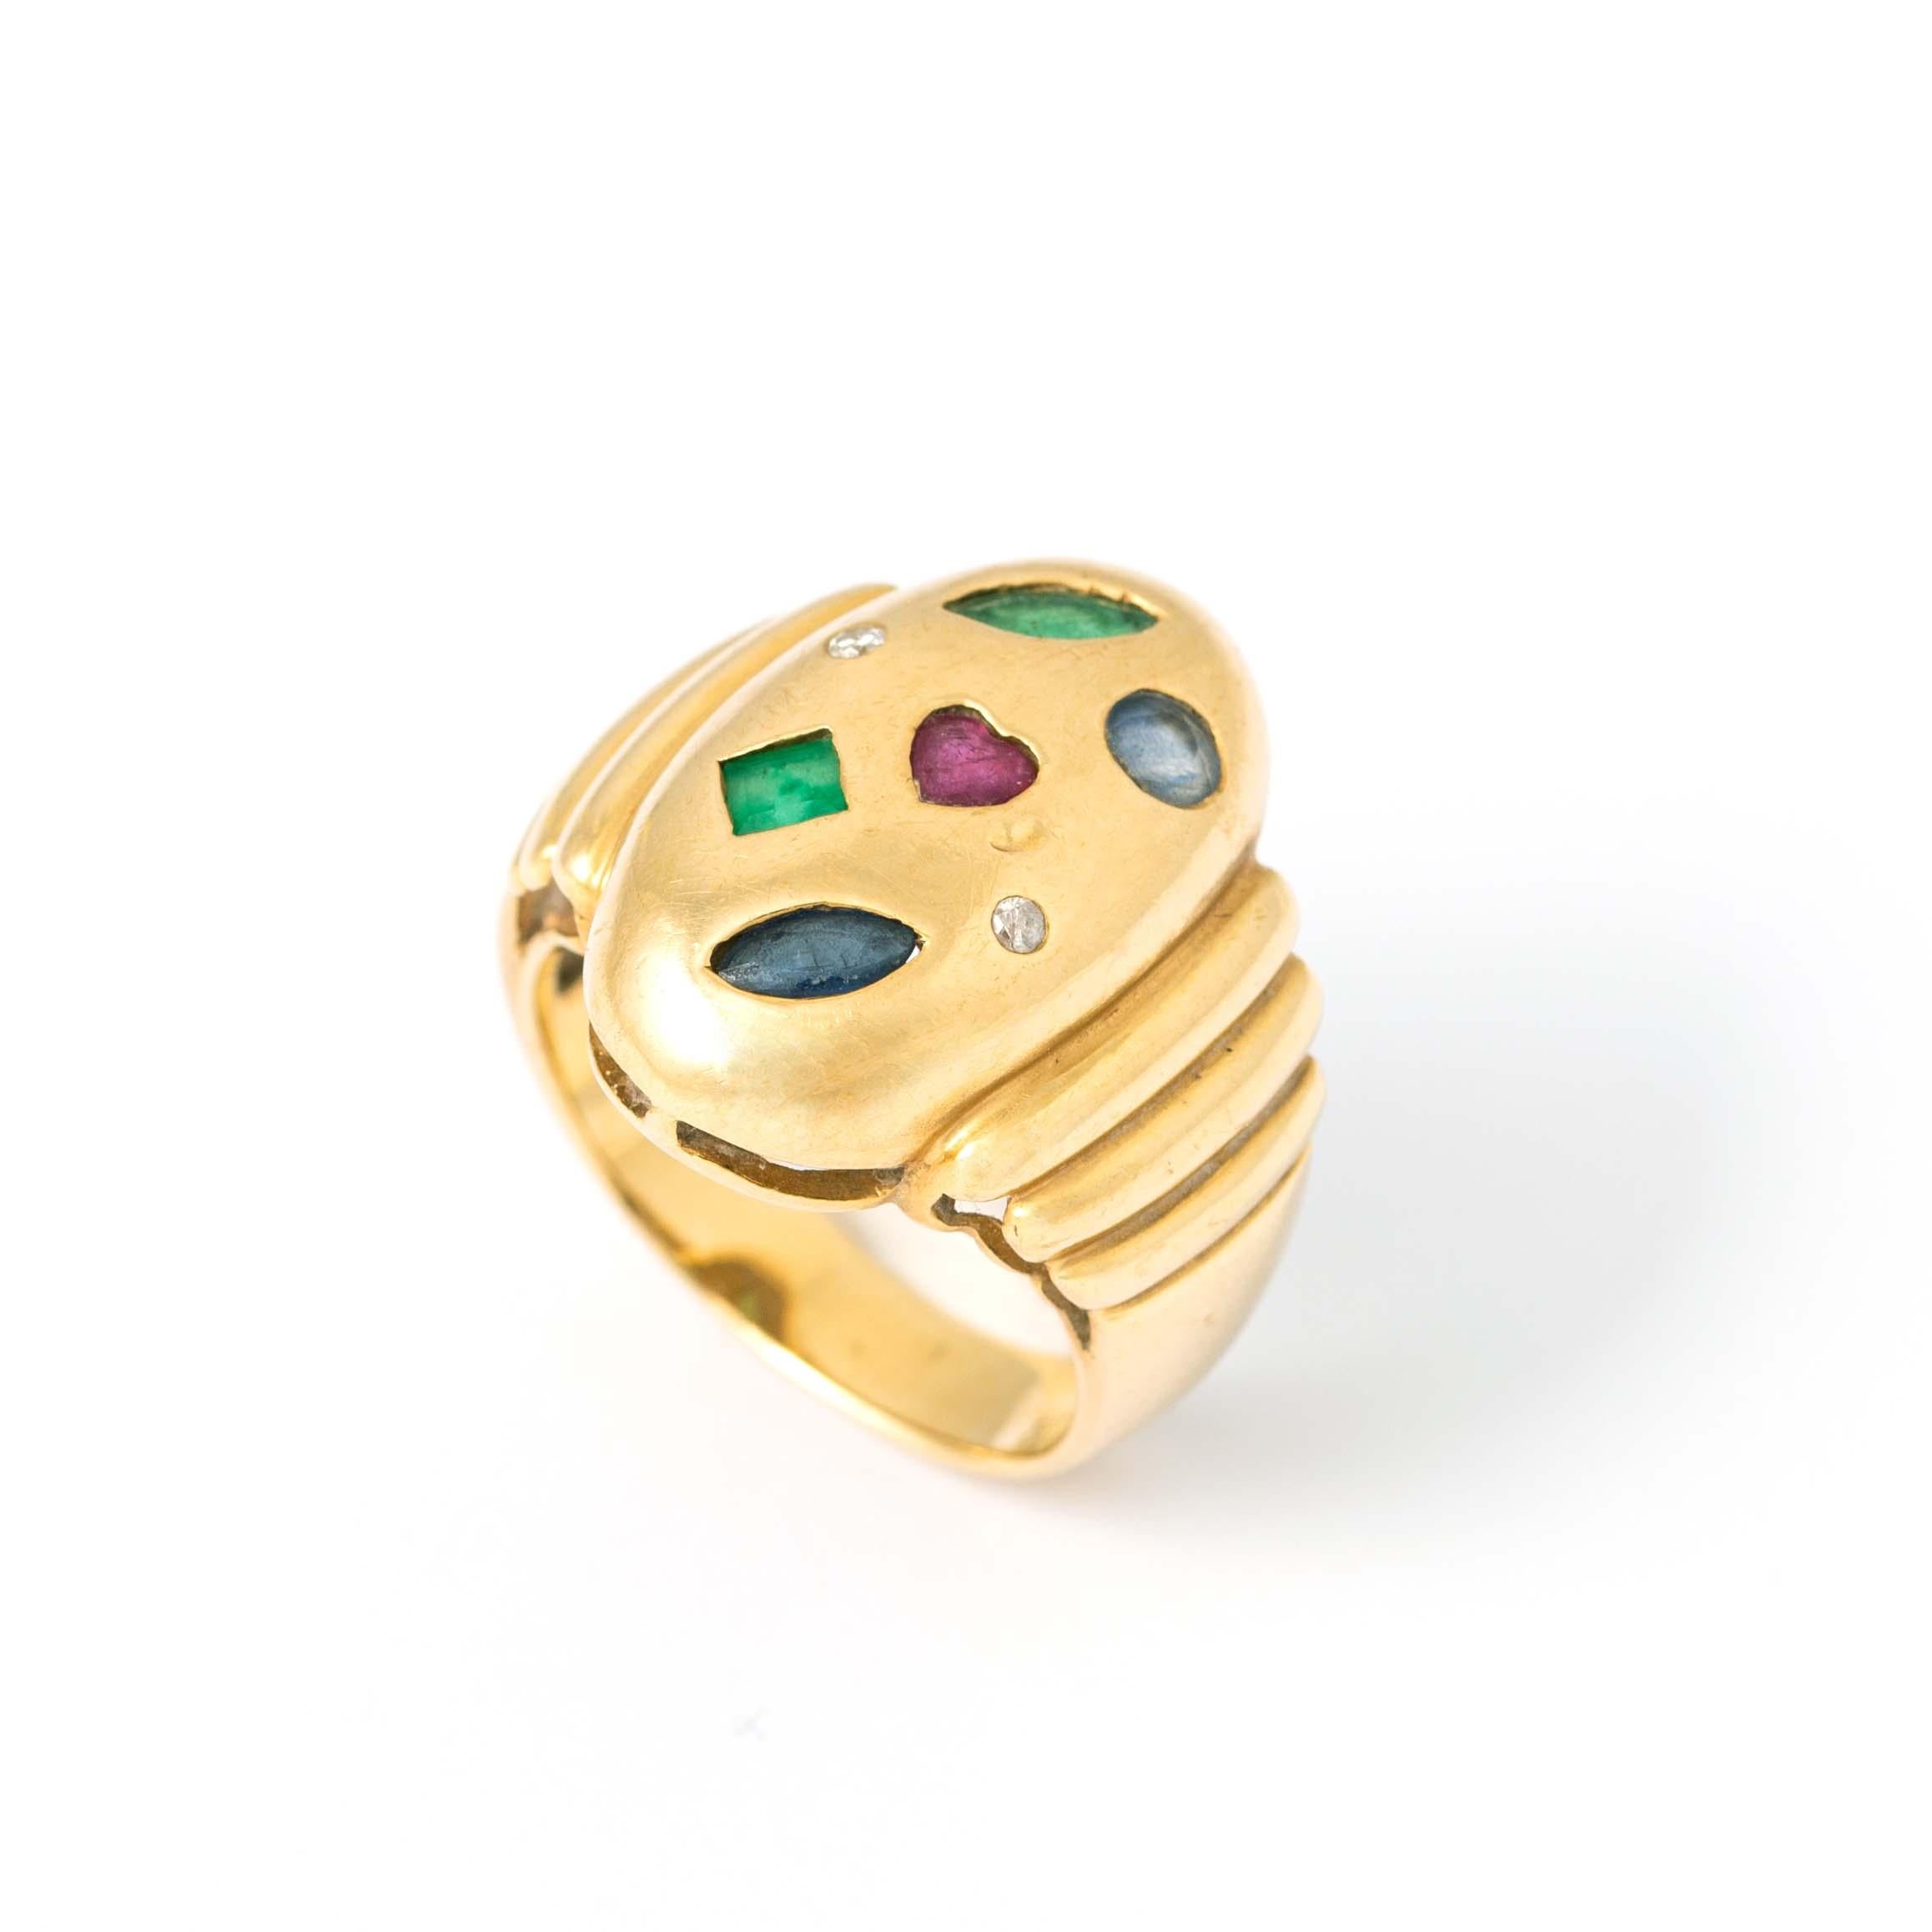 Emerald, Sapphire, Ruby and Diamond fancy cuts on Yellow Gold 18K Ring
Unreadable hallmark. Circa 1960.
Top pattern dimensions: 20.74 mm. x 12.70 mm. x 6.40 mm.
Gross weight: 9.16 grams.